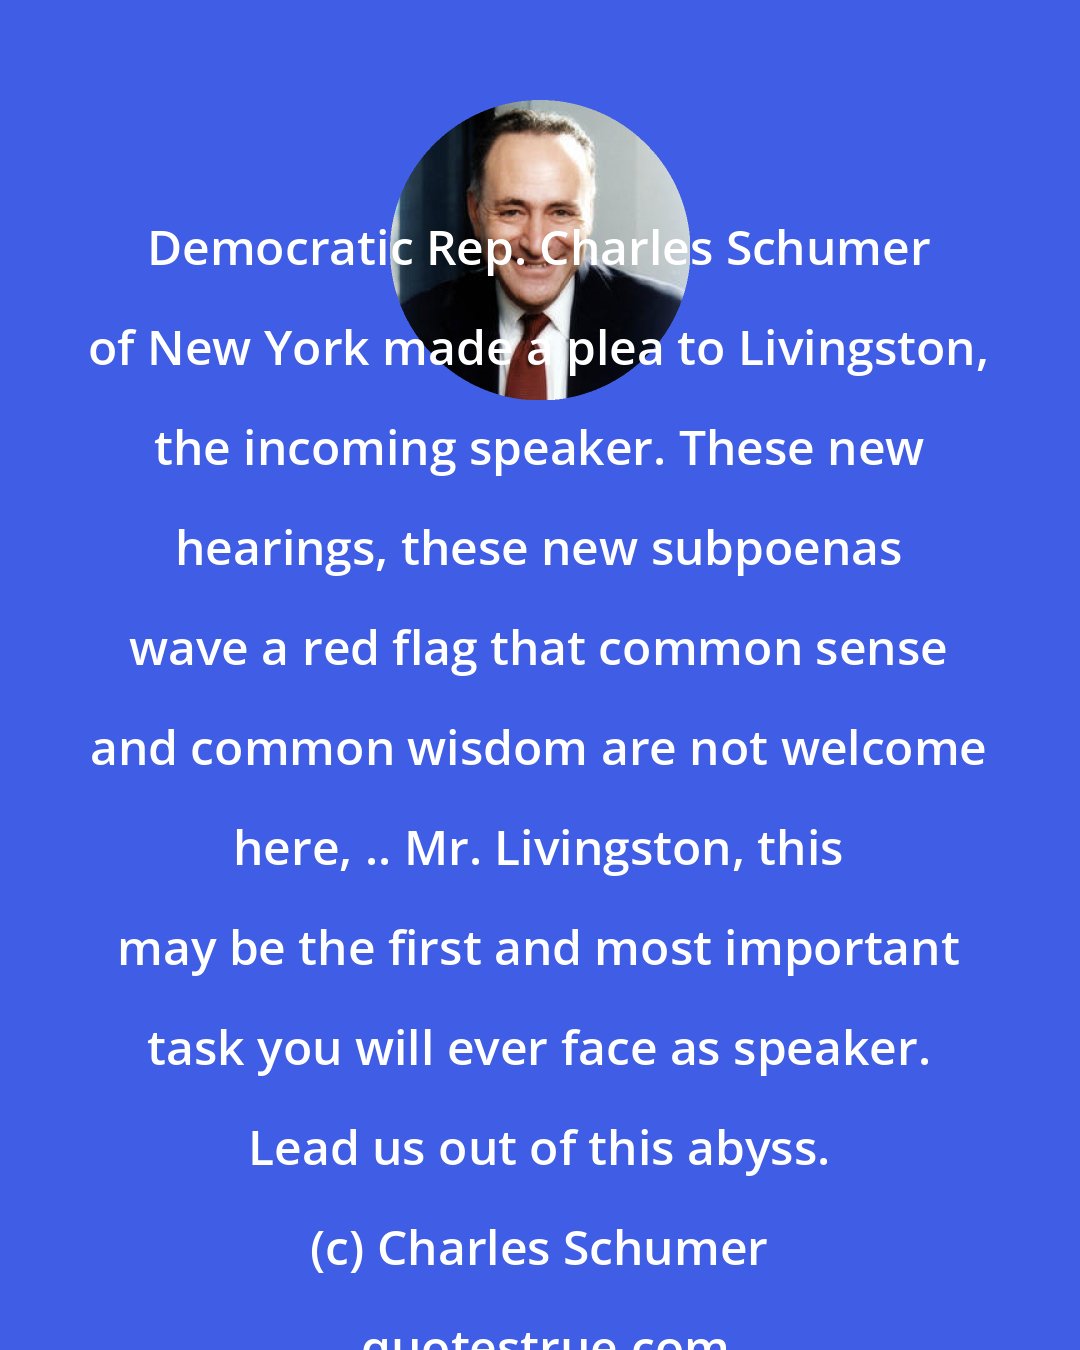 Charles Schumer: Democratic Rep. Charles Schumer of New York made a plea to Livingston, the incoming speaker. These new hearings, these new subpoenas wave a red flag that common sense and common wisdom are not welcome here, .. Mr. Livingston, this may be the first and most important task you will ever face as speaker. Lead us out of this abyss.